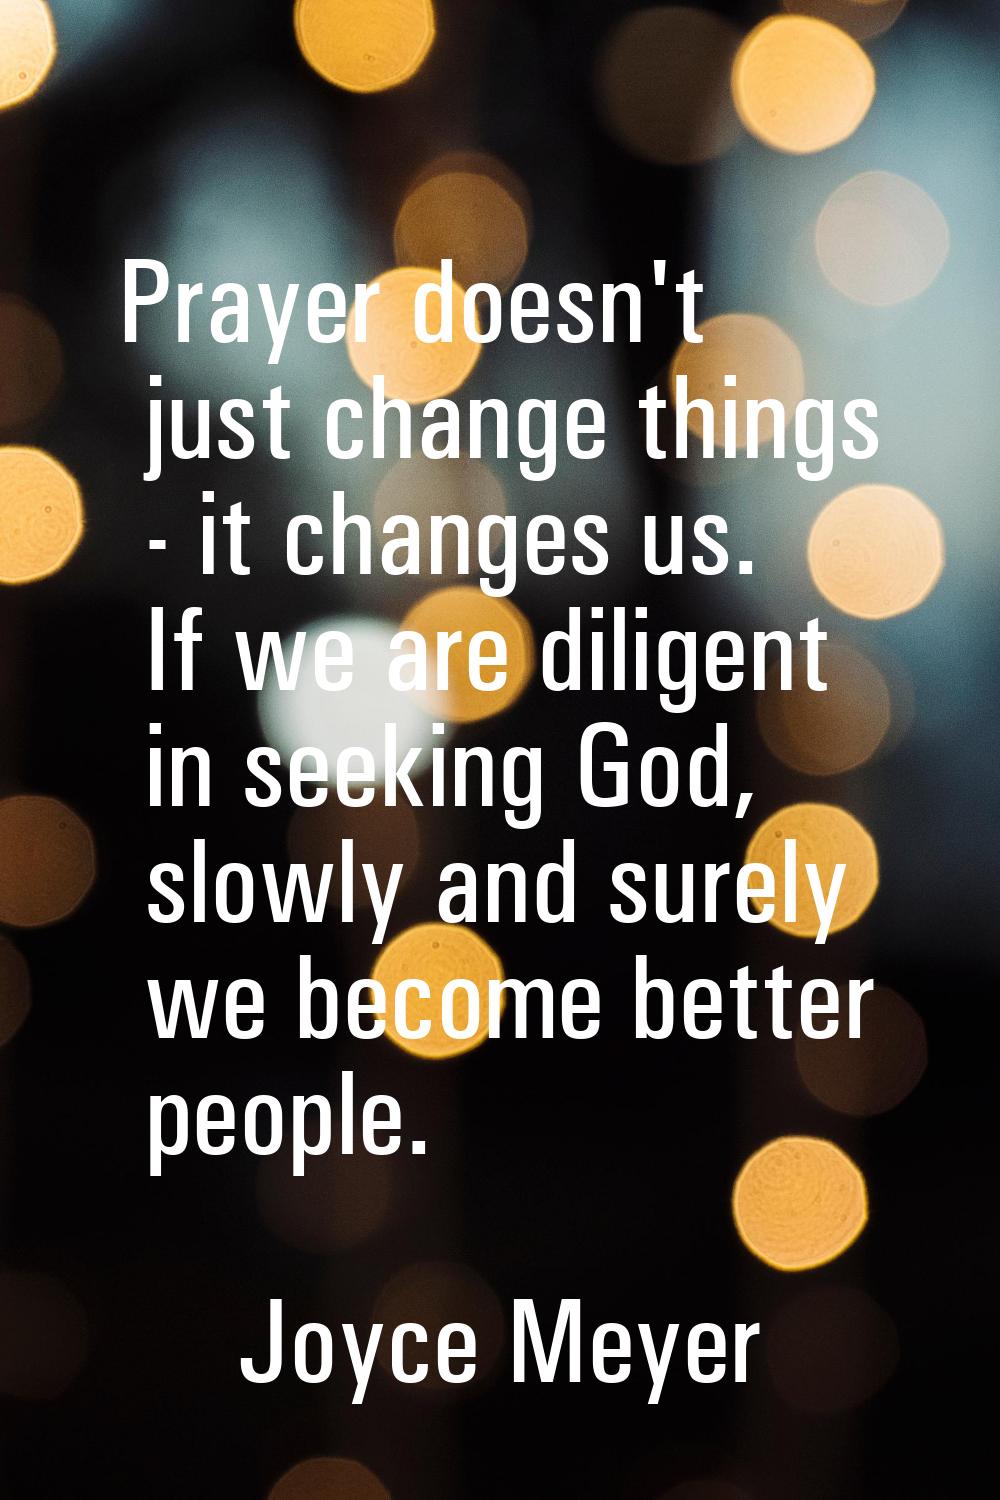 Prayer doesn't just change things - it changes us. If we are diligent in seeking God, slowly and su